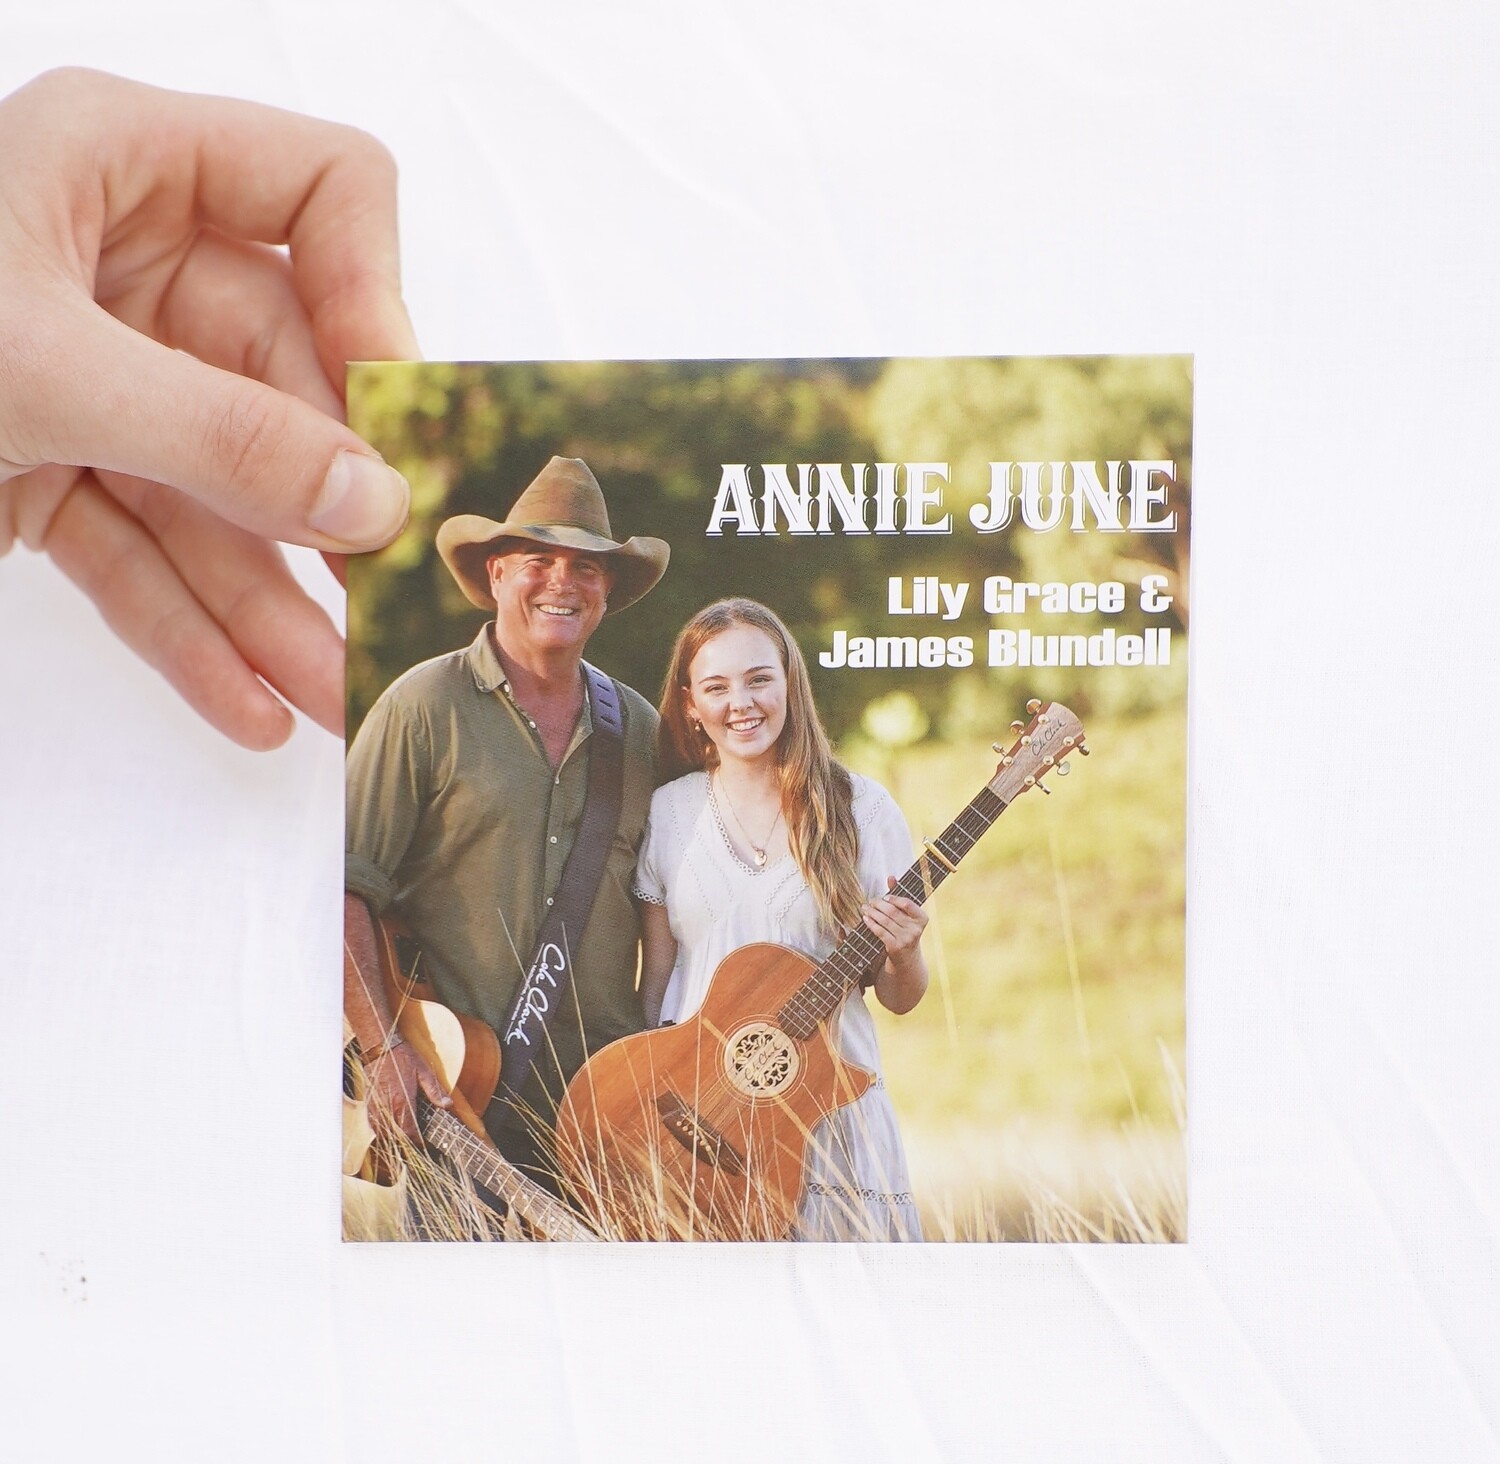 Annie June CD (signed) - AUS only